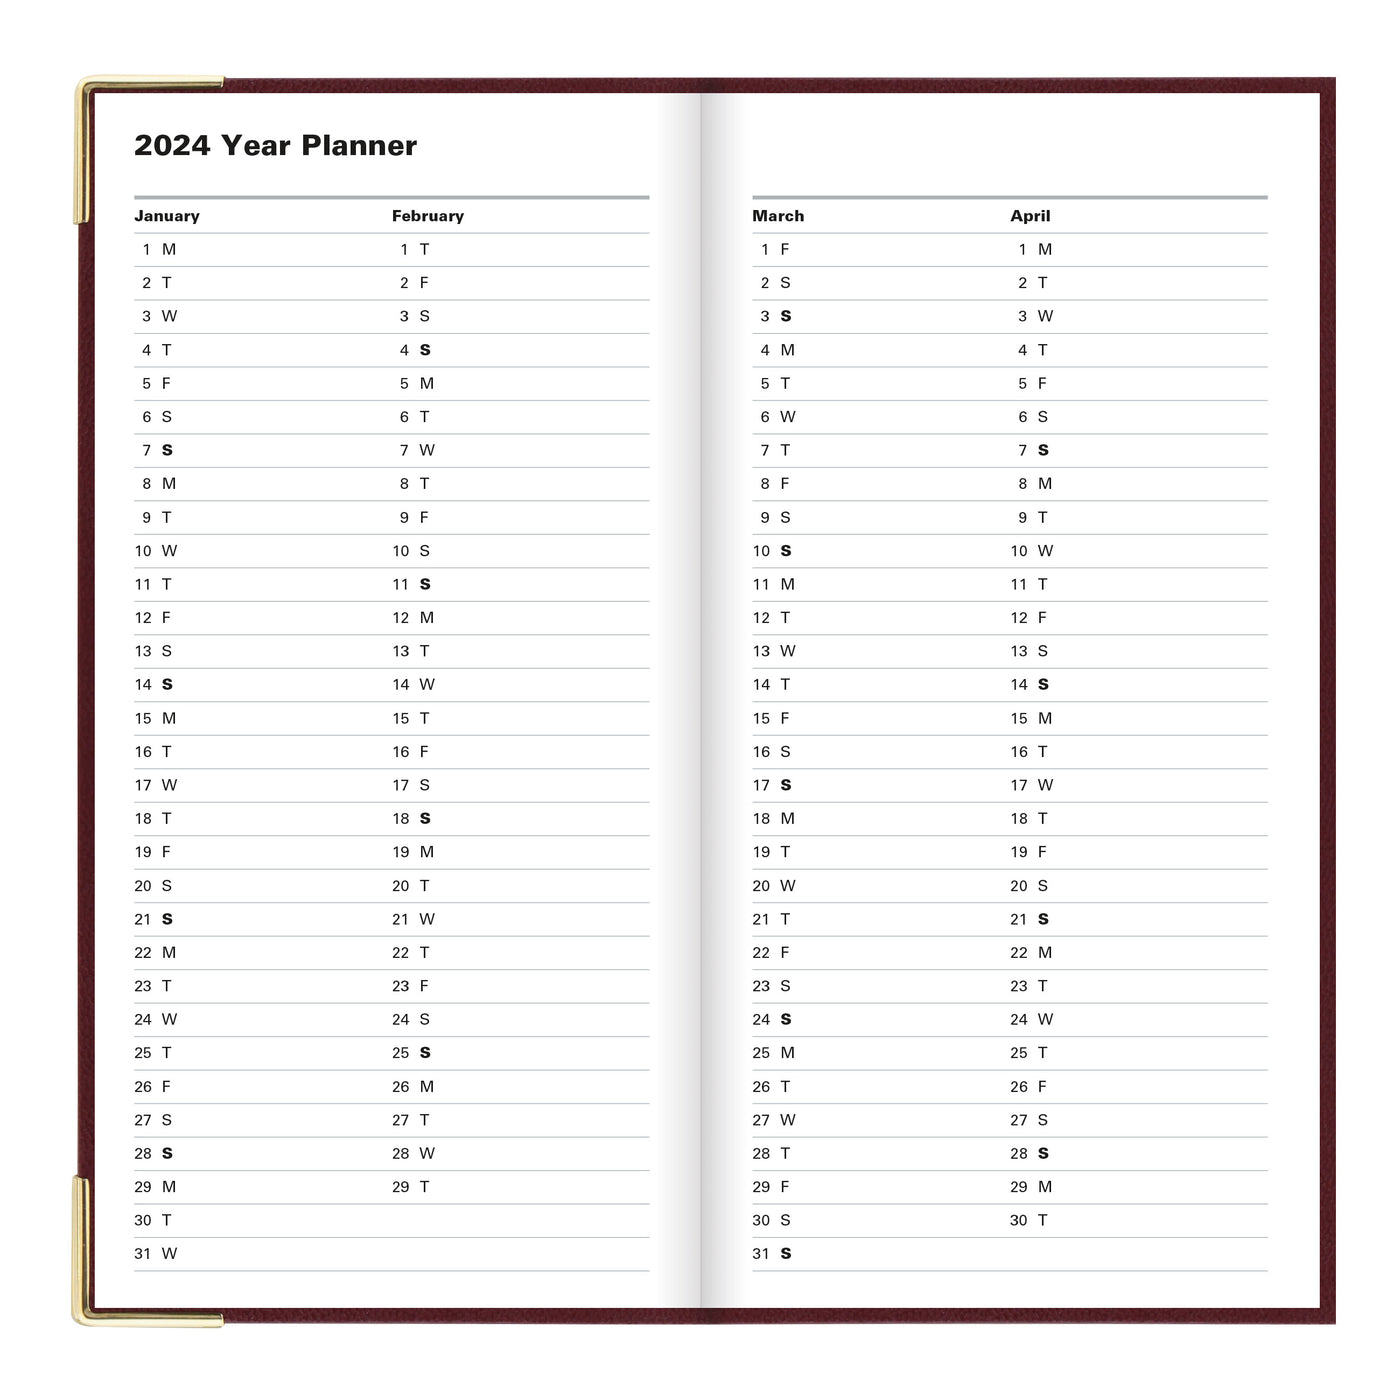 Letts Classic Week to View Vertical Planner - 6 5/8" x 3 1/4" - Burgundy